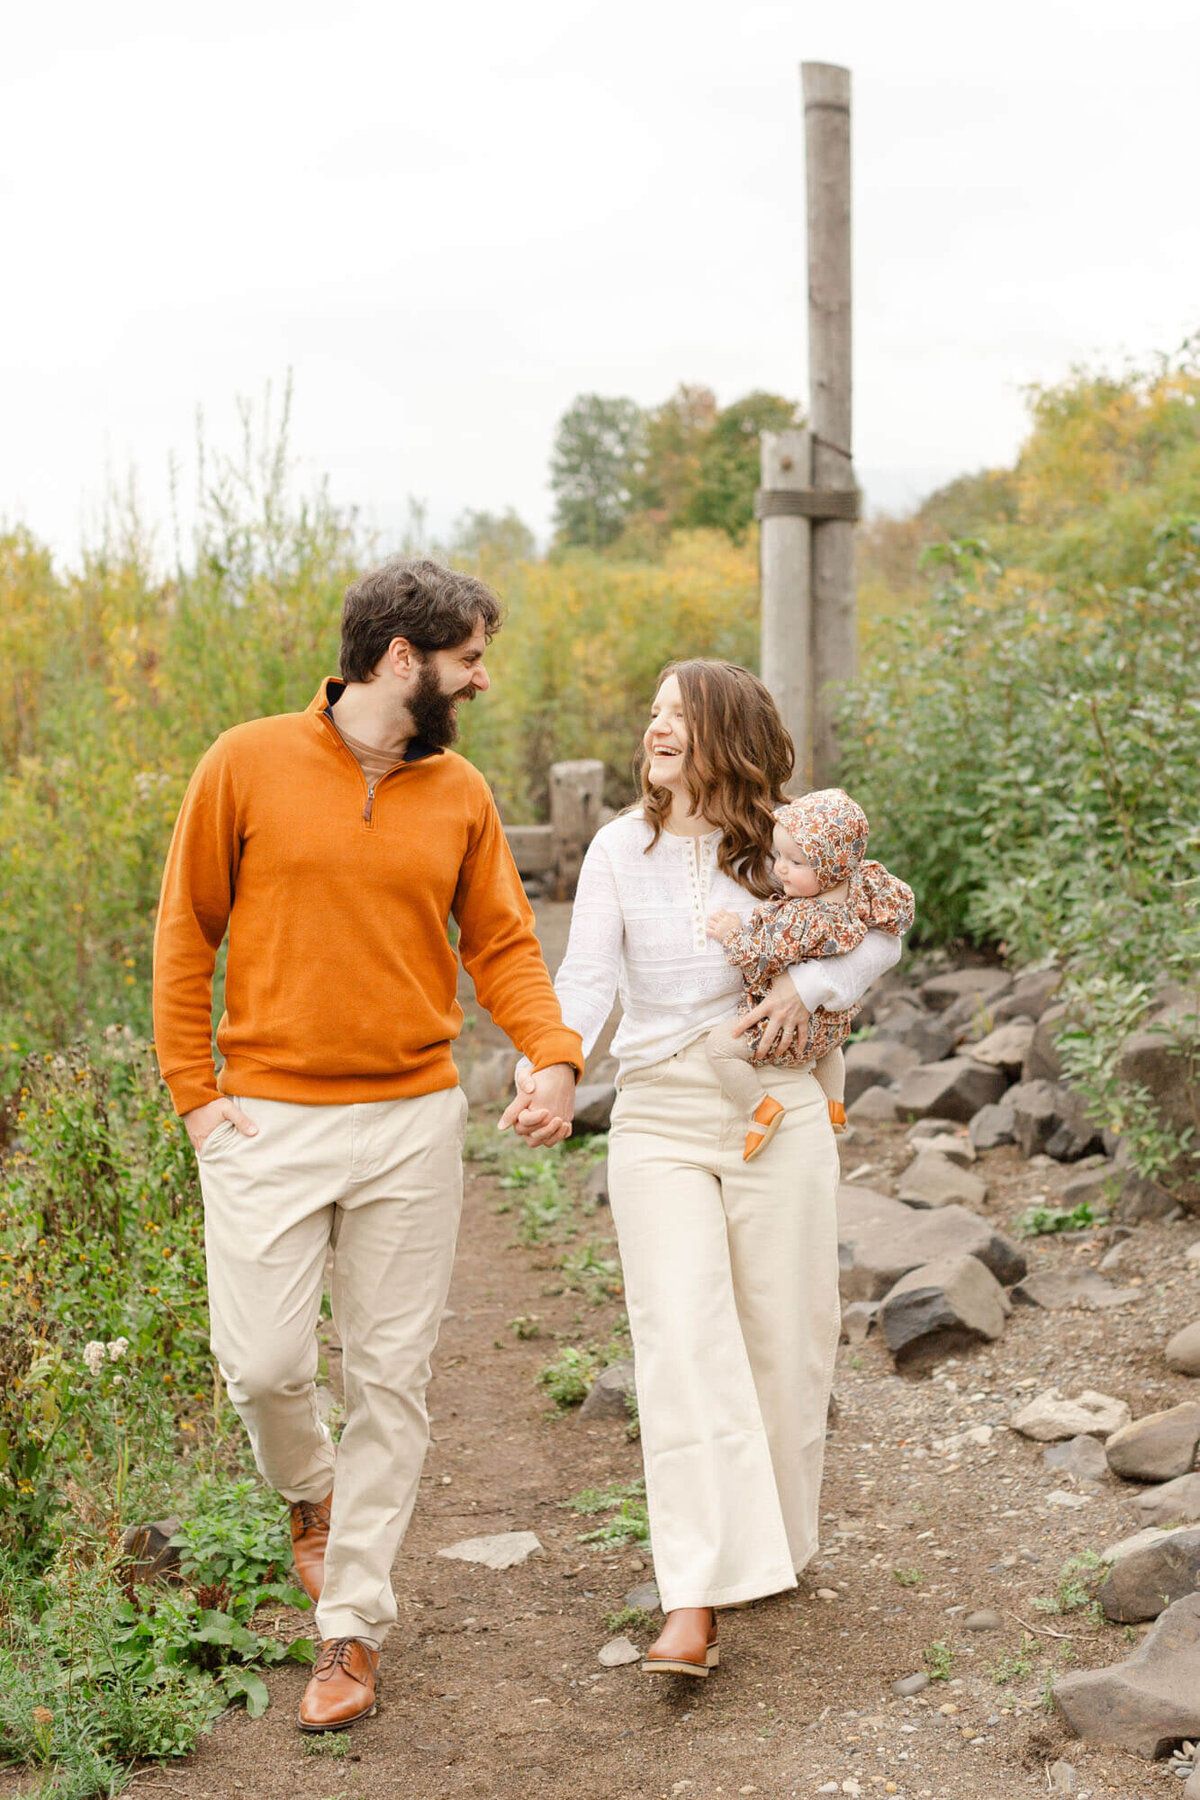 Mom and Dad are holding hands and walking together looking at each other out in nature. mom is holding baby on her hip. Dad is in a rust colored sweater and baby is wearing a floral romper with rust hues. Mom is in light, neutral tones. There is a lot of greenery to the sides and behind them.